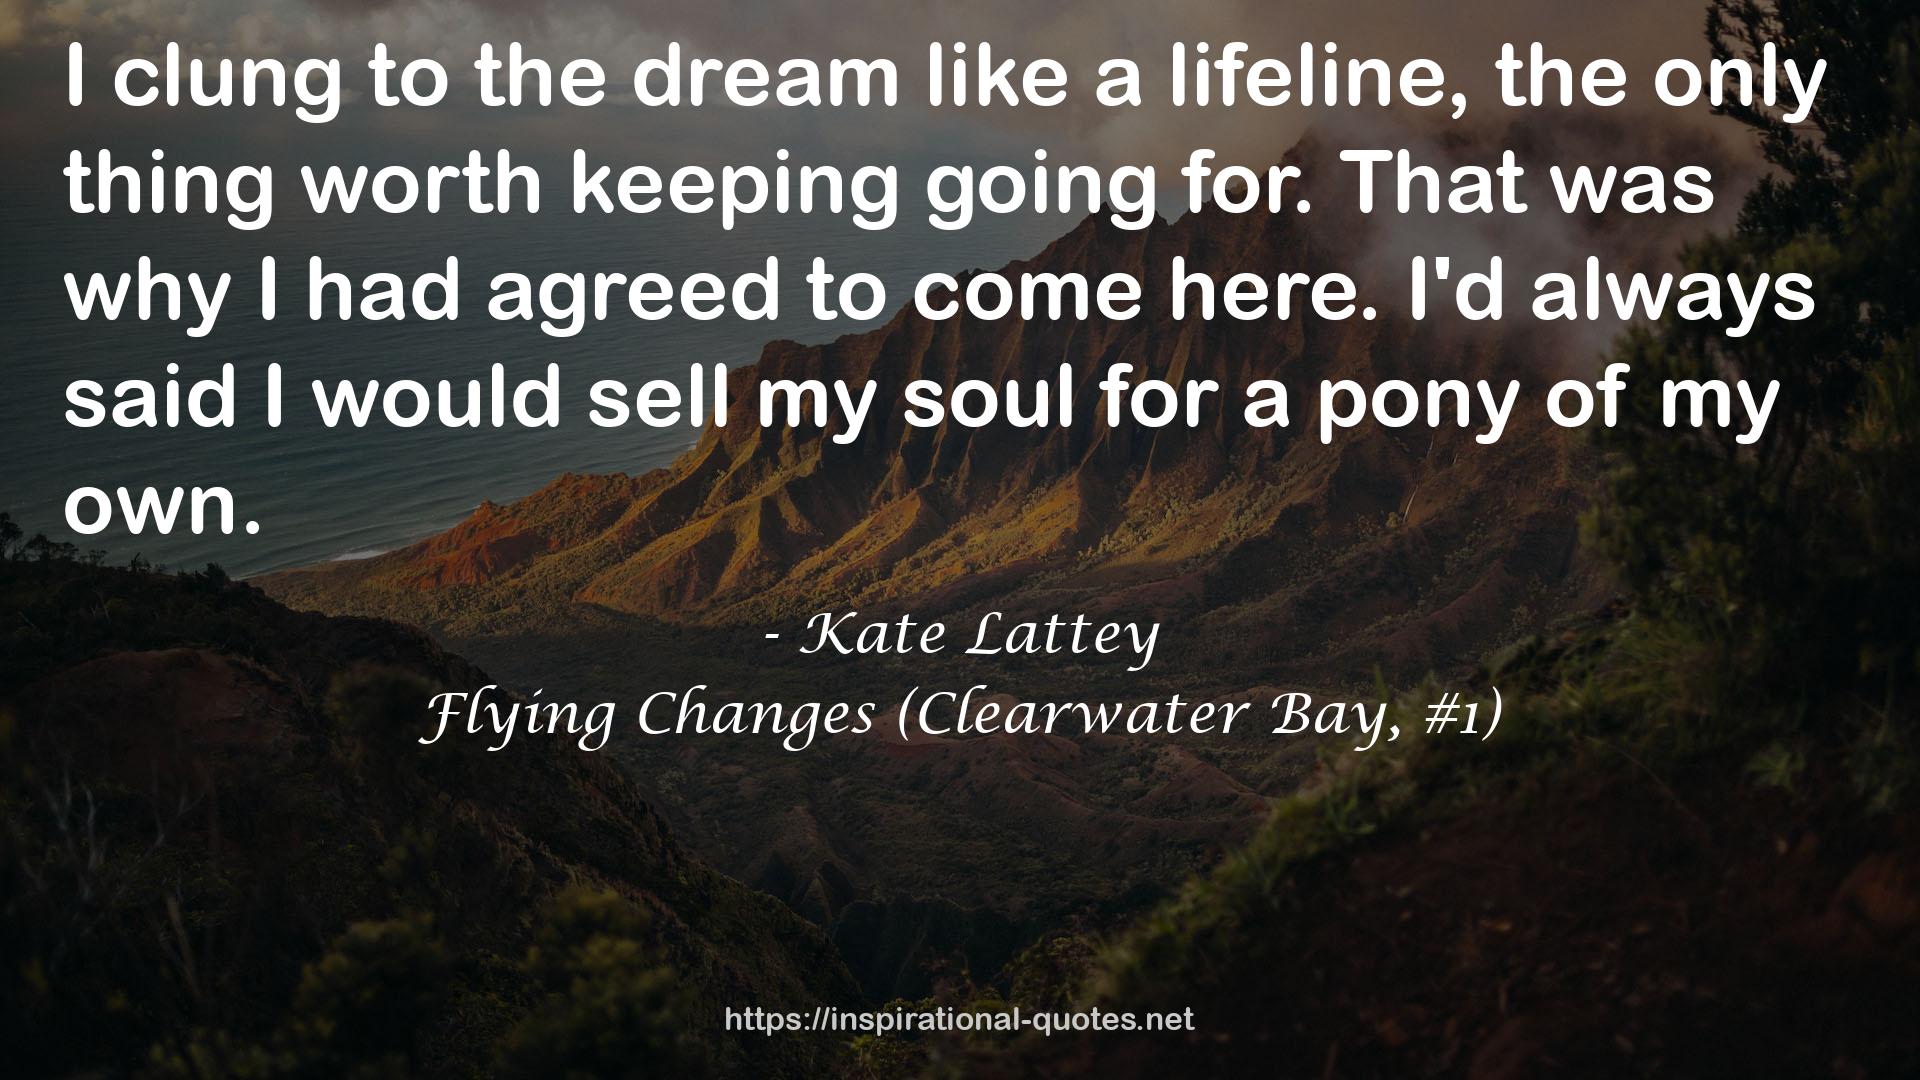 Flying Changes (Clearwater Bay, #1) QUOTES